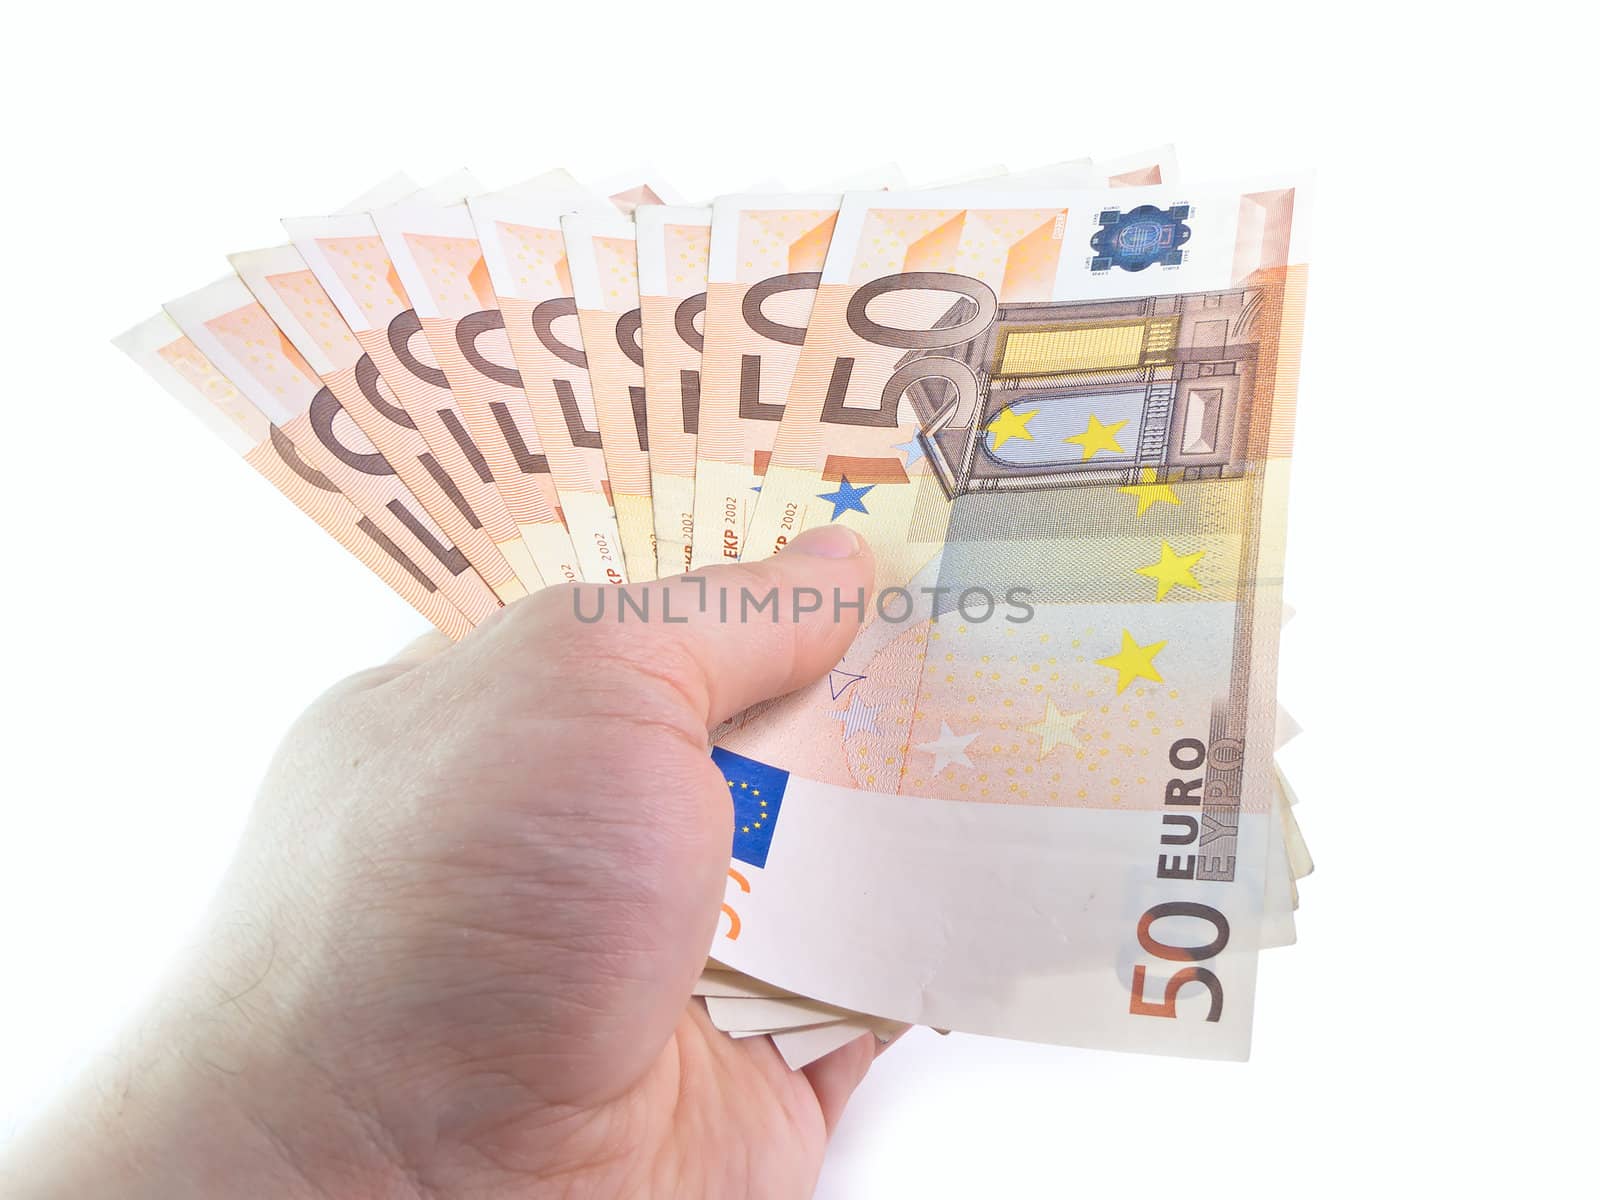 The isolated denominations in 50 euros in a hand